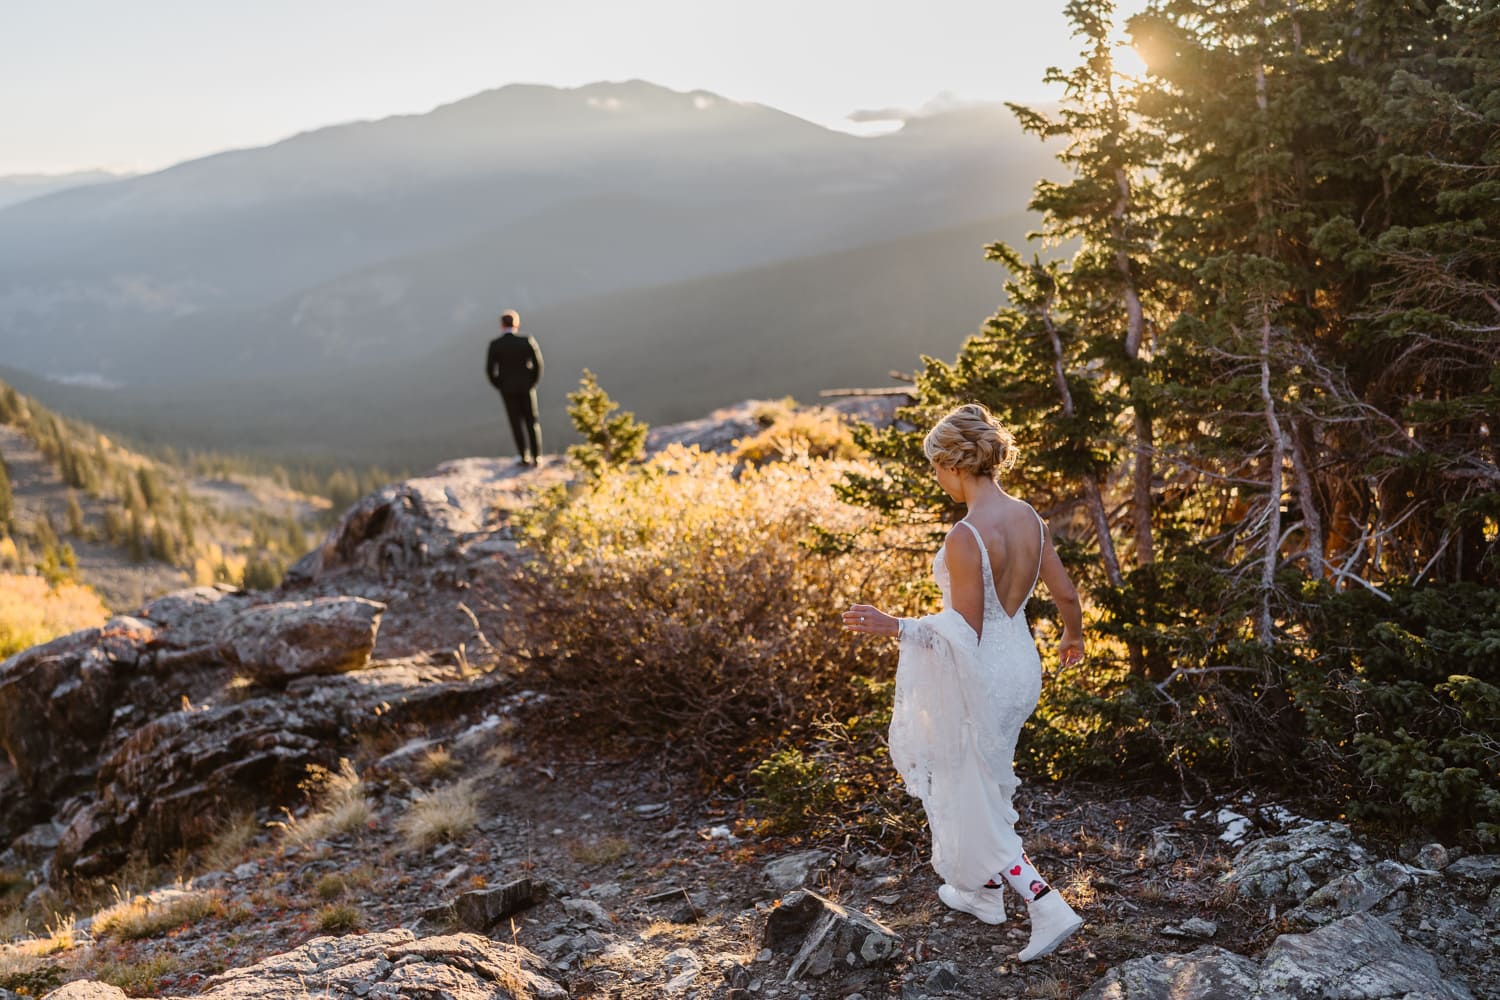 Kelsey getting ready for their Breckenridge elopement.